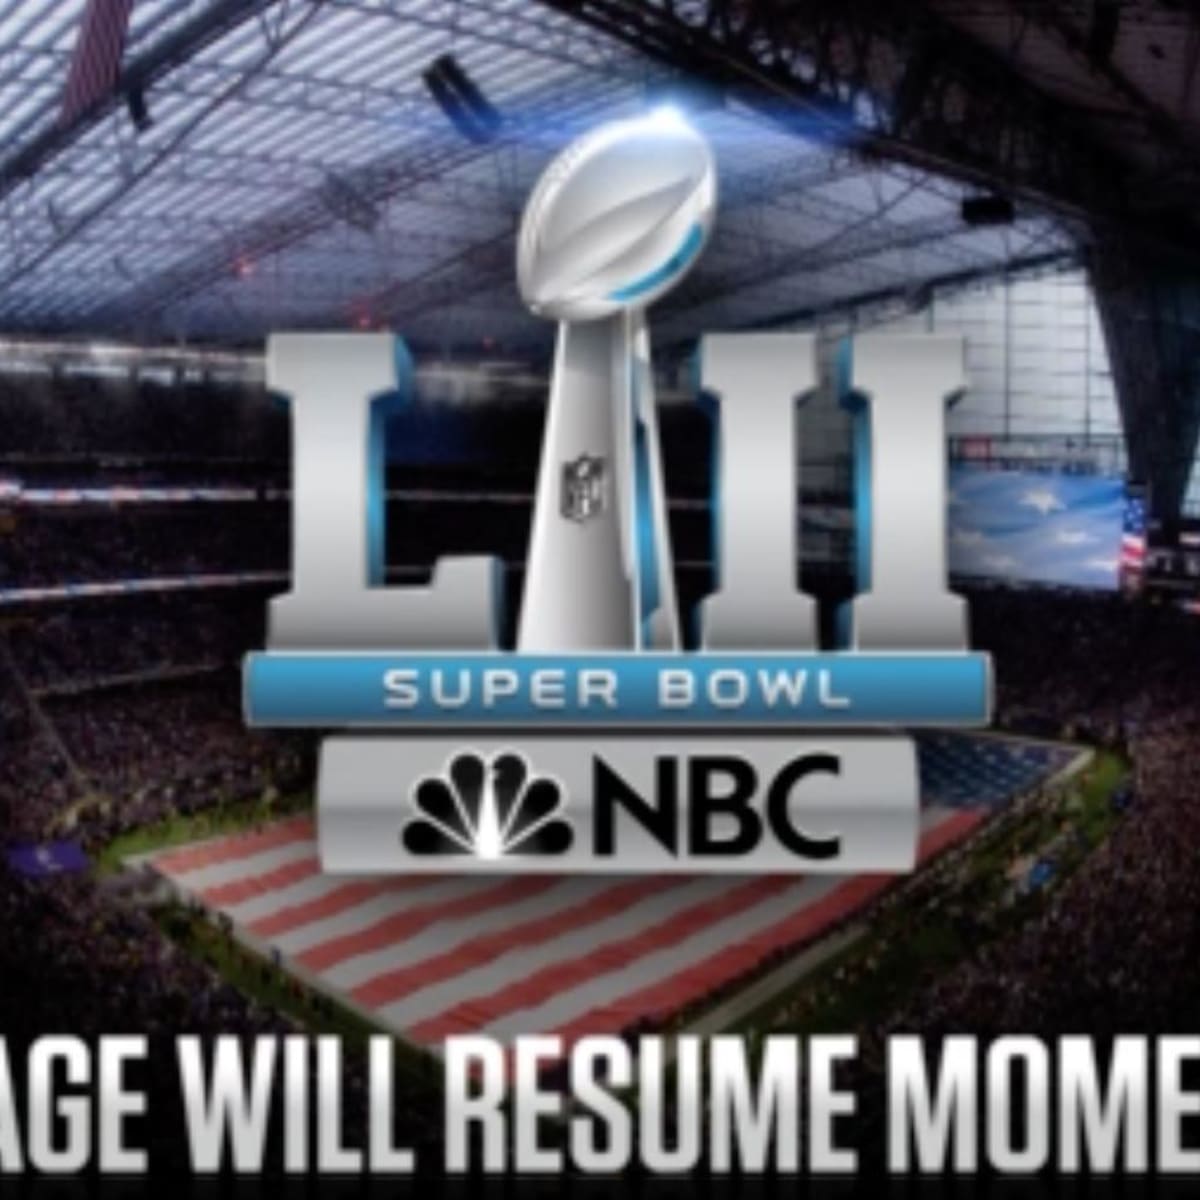 Free Super Bowl Live Stream Available From NBC